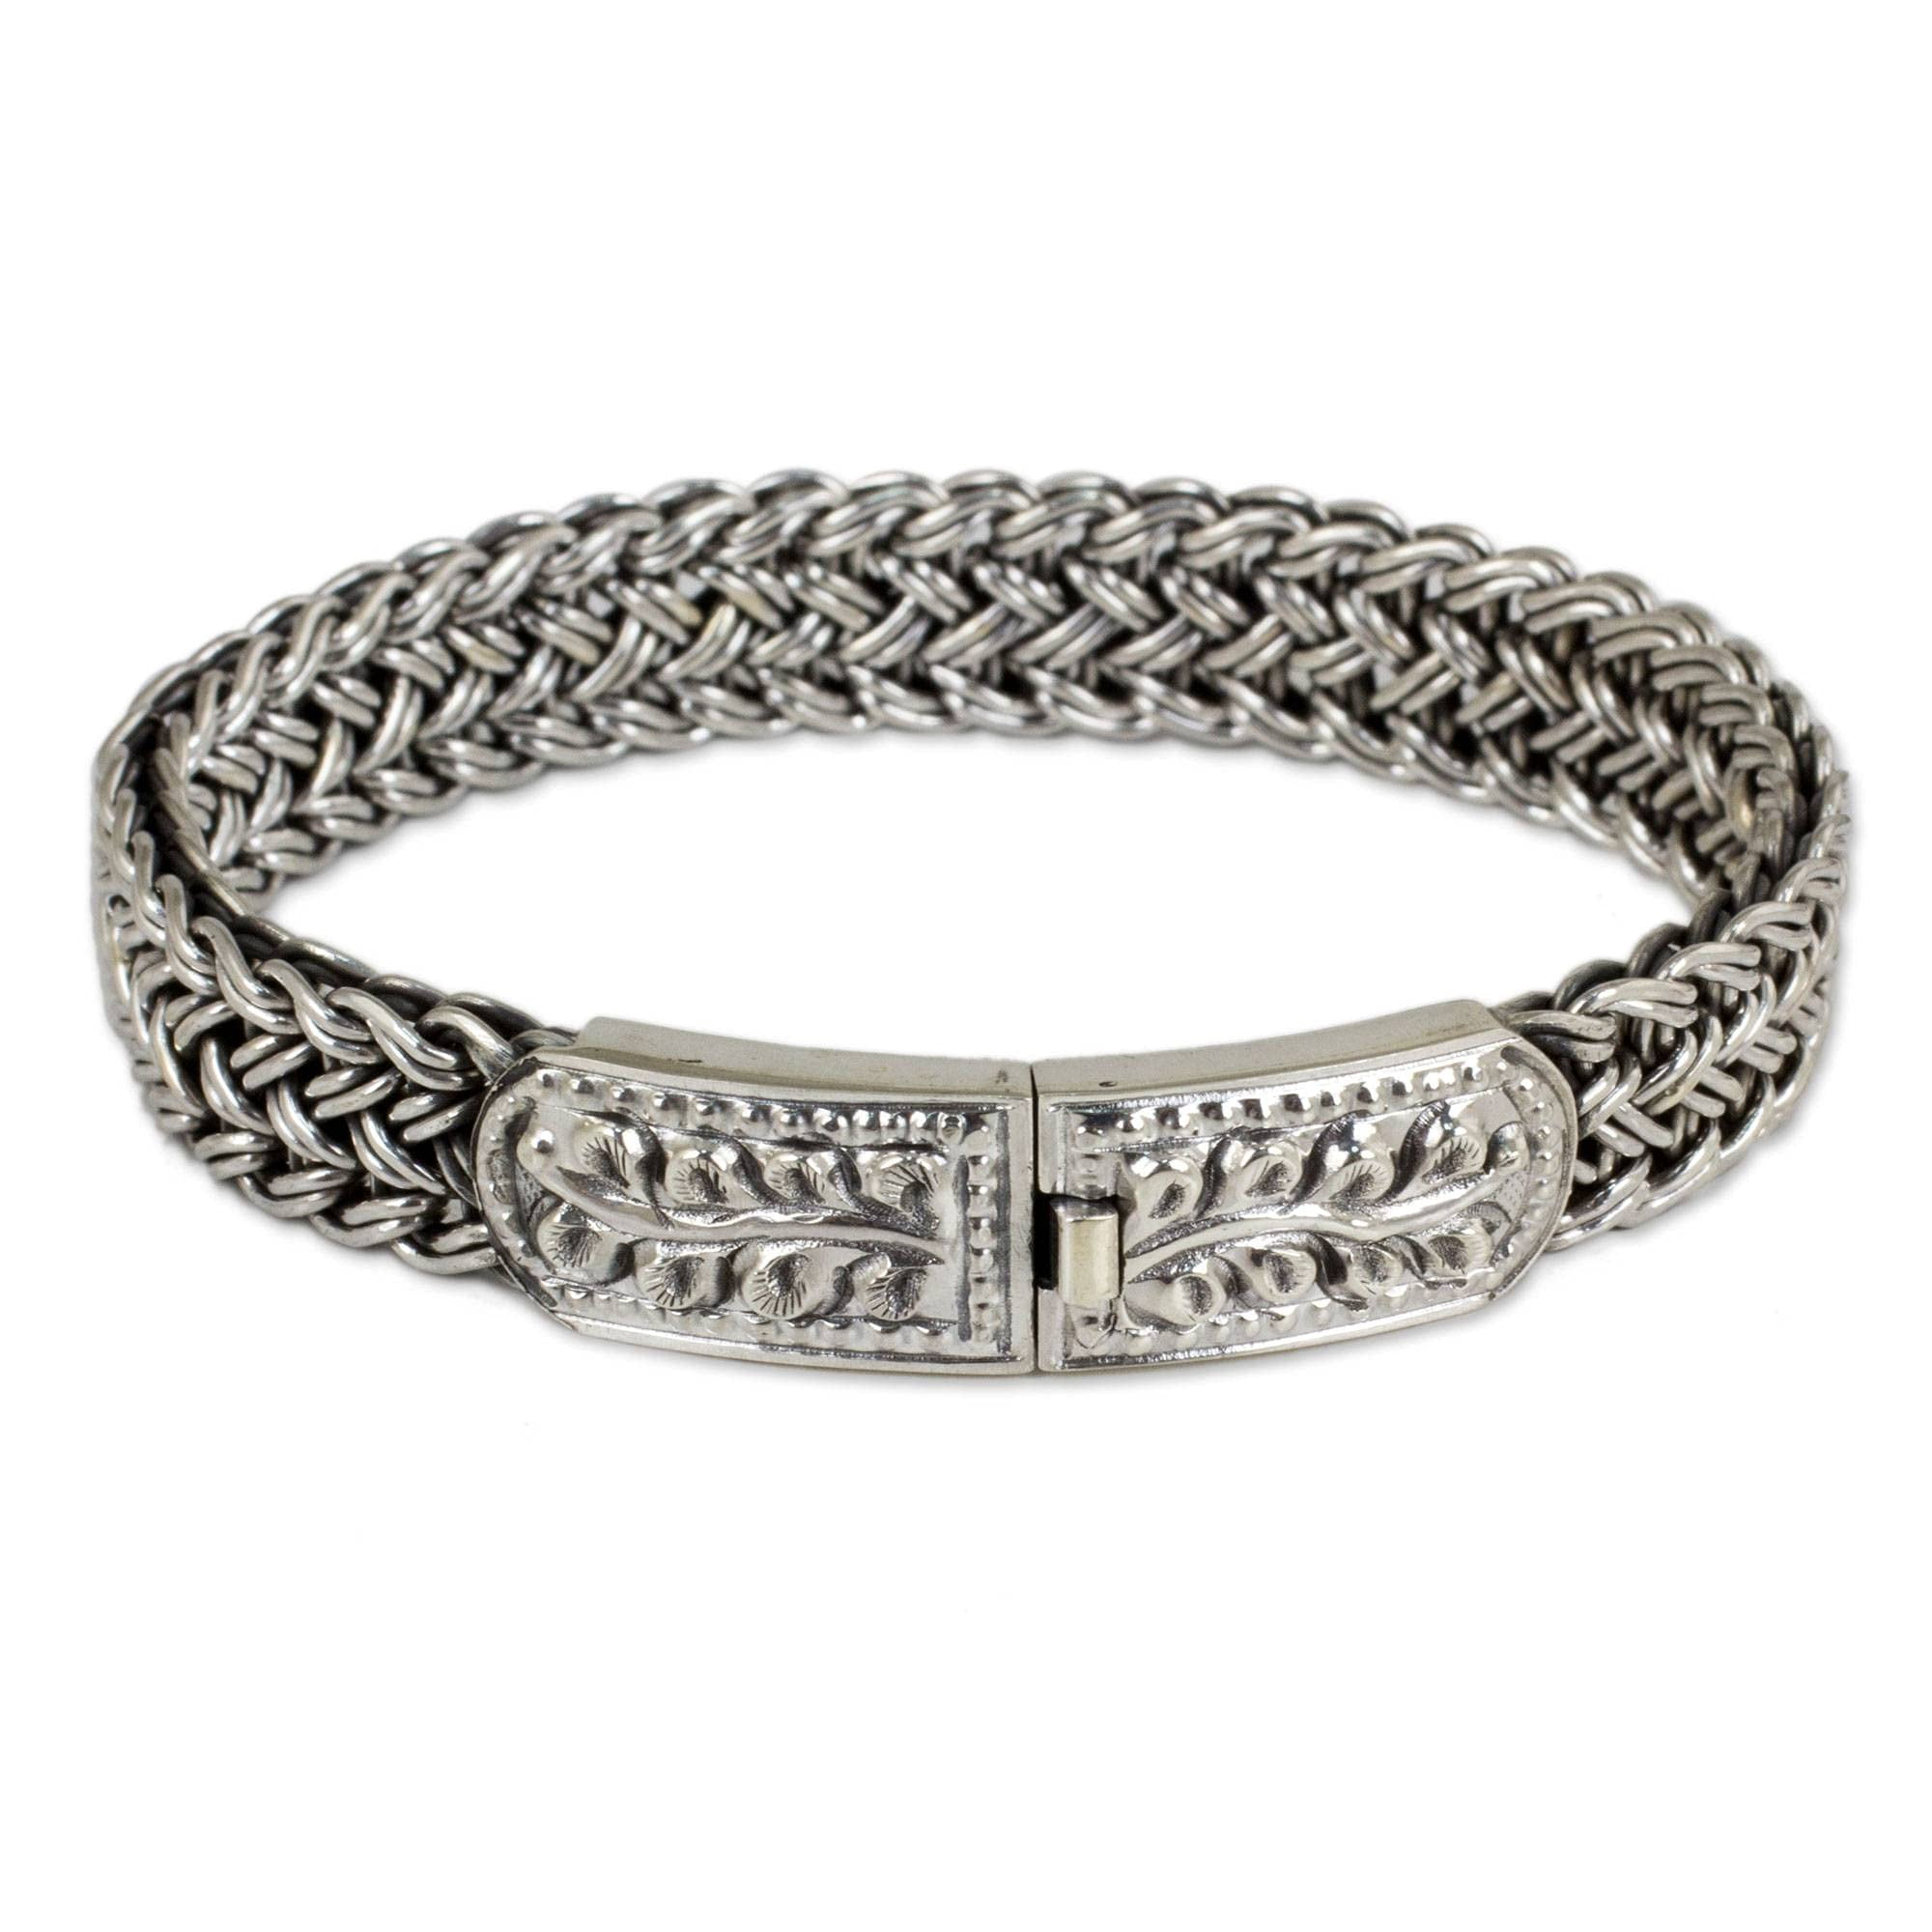 NOVICA .925 Sterling Silver Braided Chain Bracelet with Dragon Clasp, 8.5